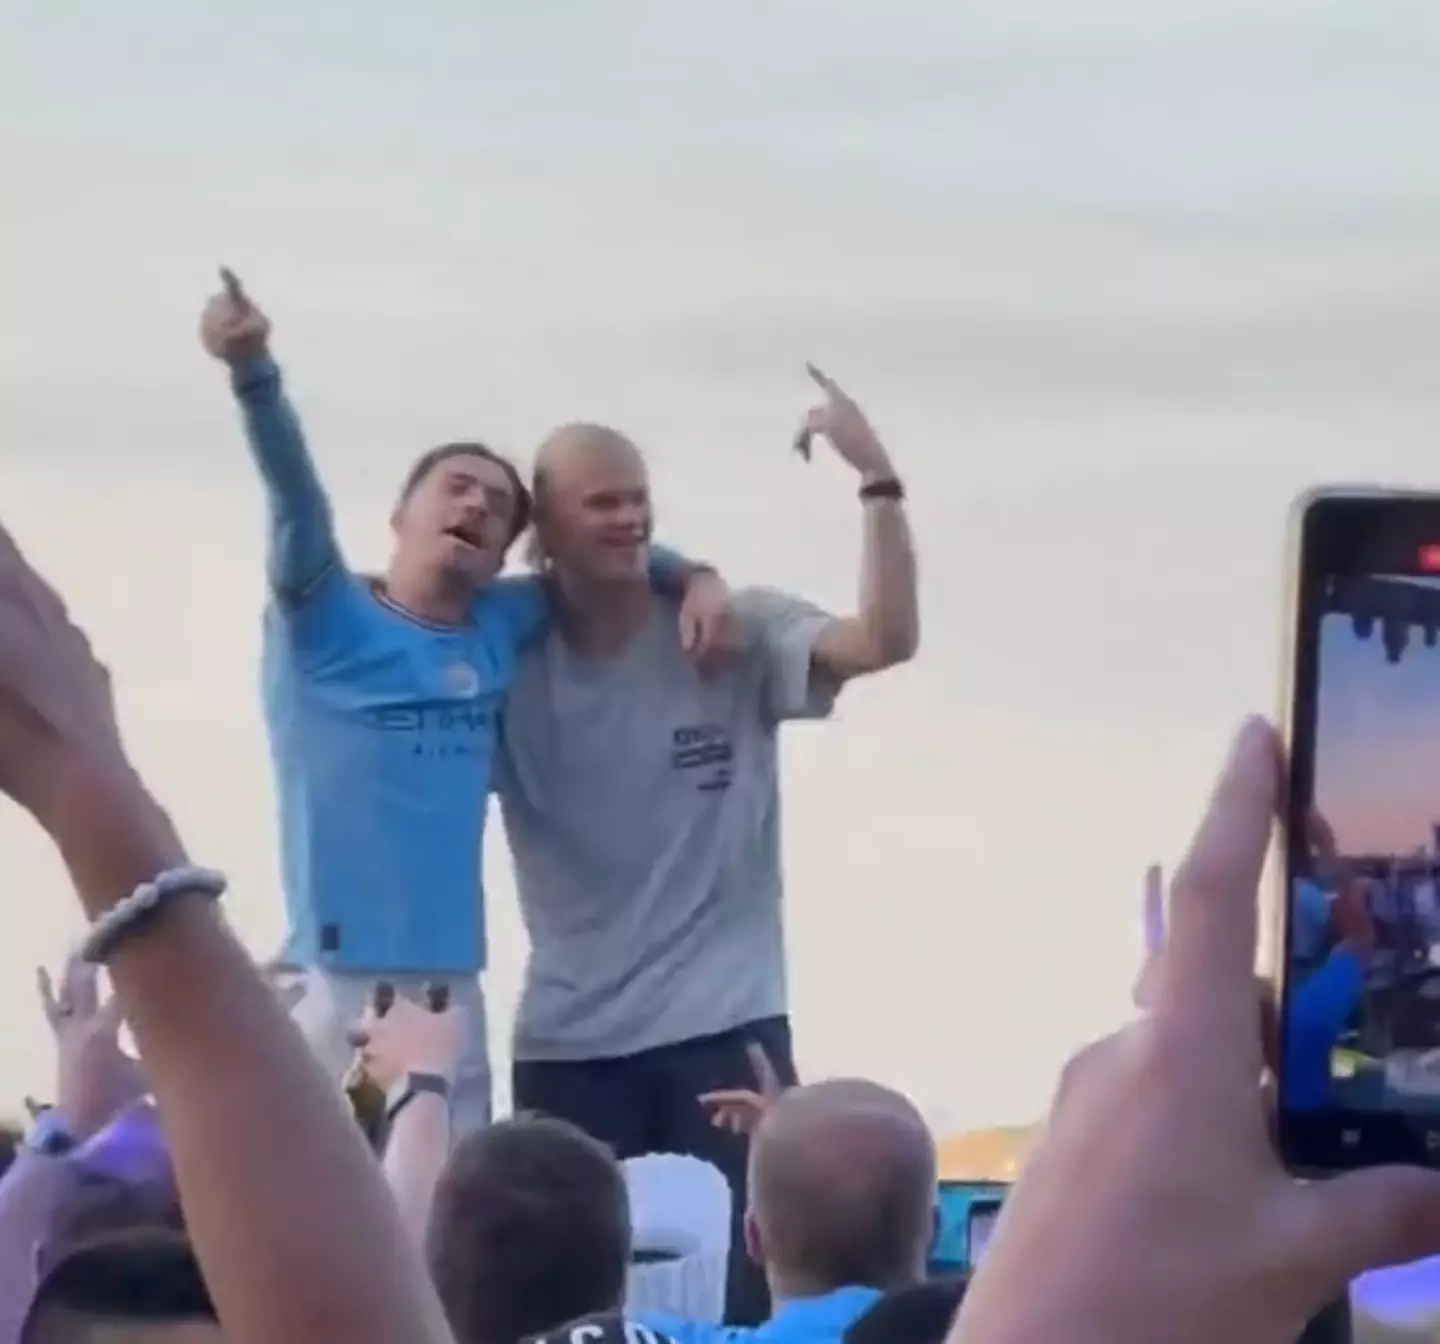 Jack Grealish and Erling Haaland were spotted partying this morning with Grealish still wearing his sky blue kit.